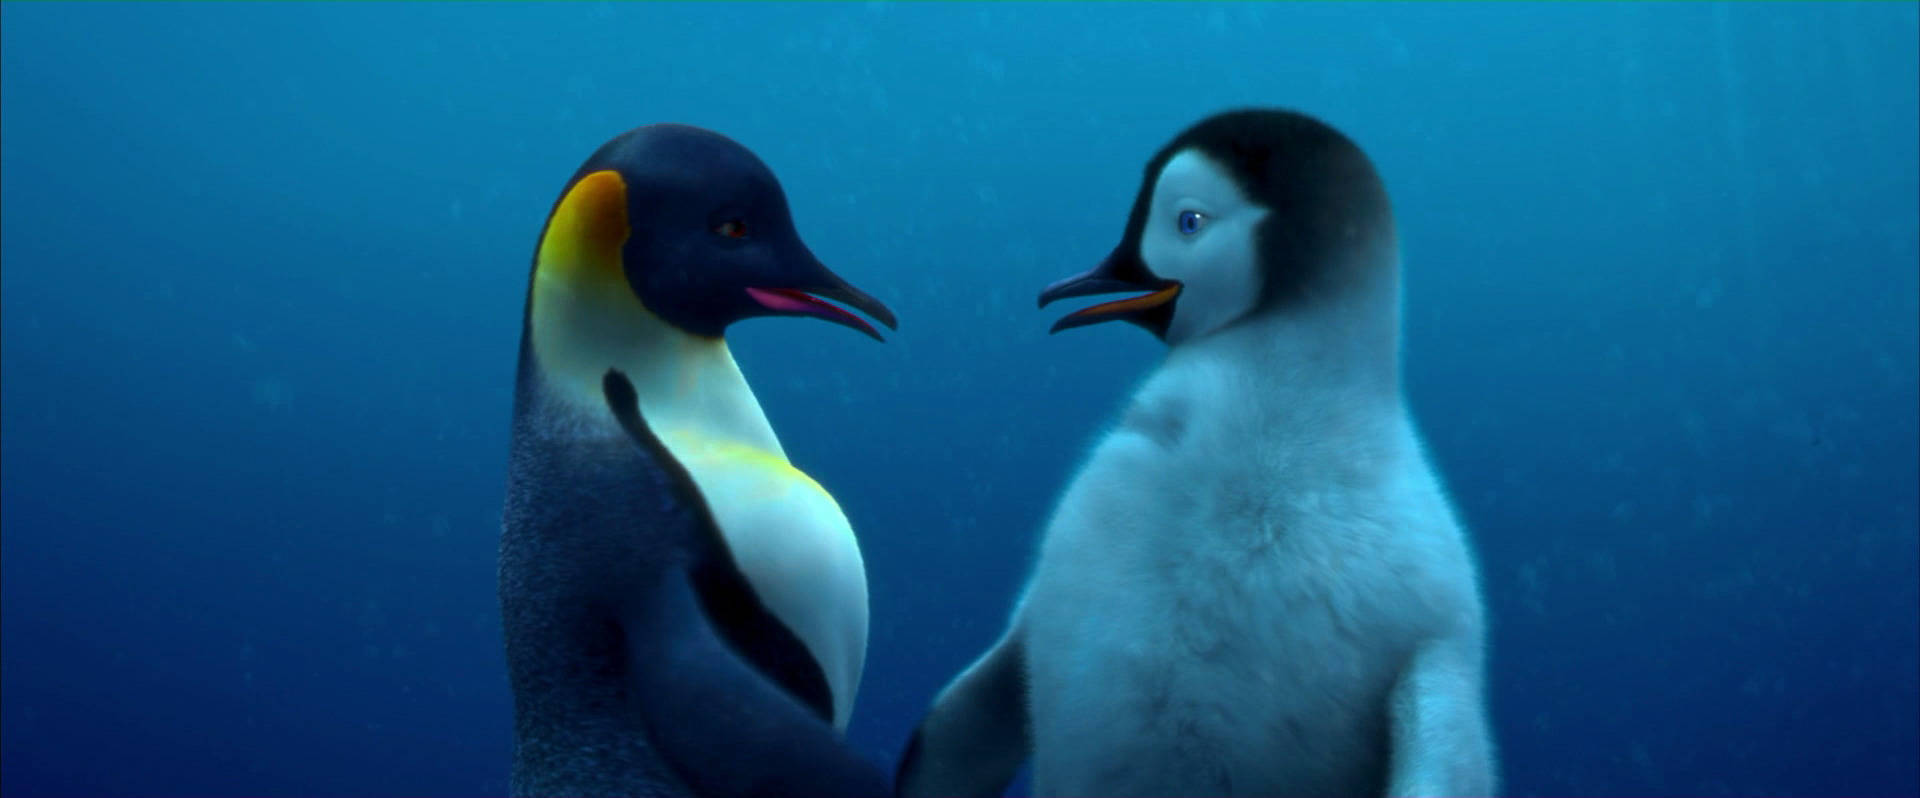 Two Penguins Are Standing Next To Each Other Wallpaper